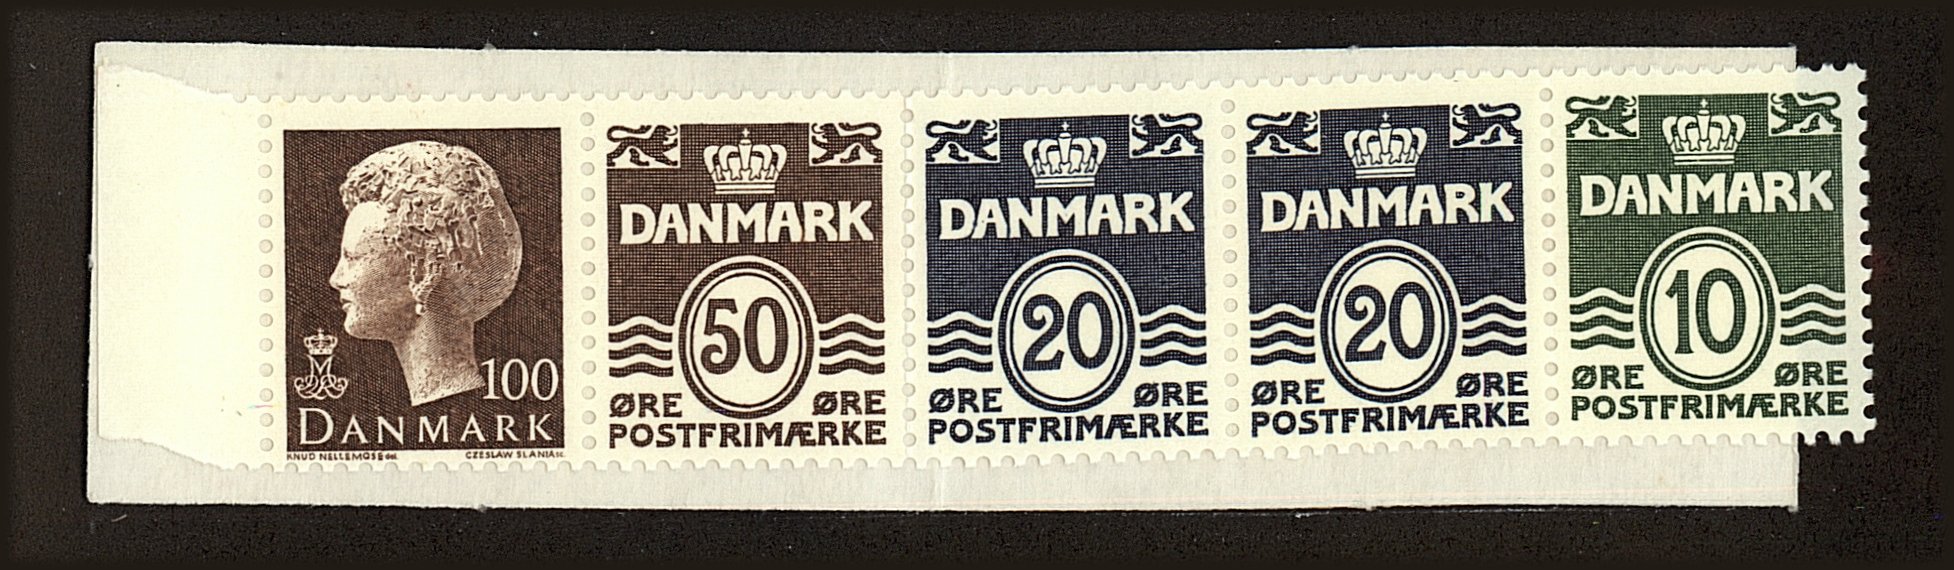 Front view of Denmark 544a collectors stamp